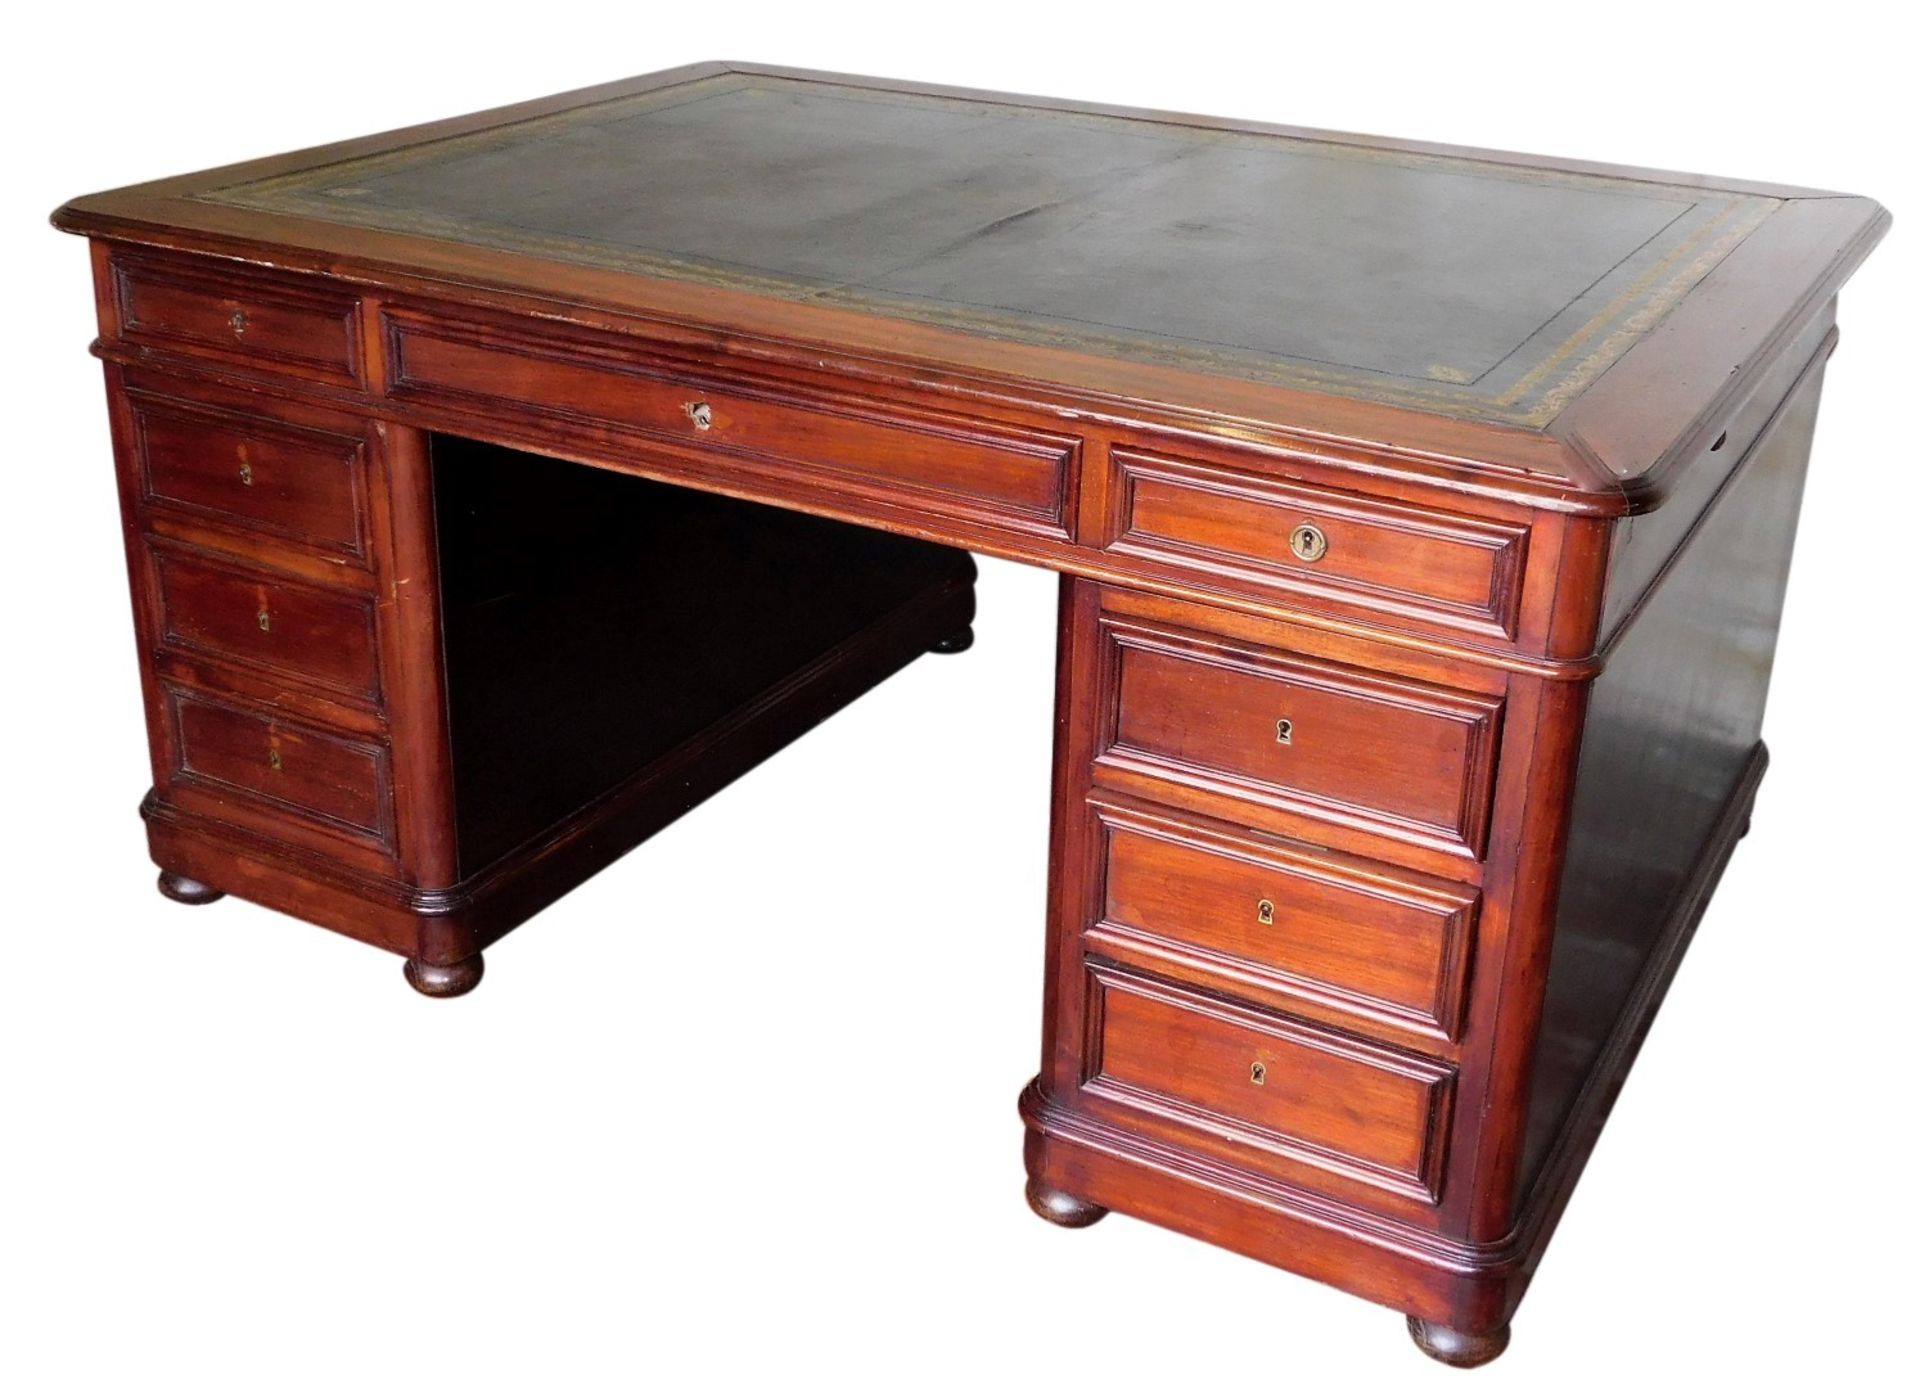 A Victorian mahogany partner's desk, with gilded leather skiver, frieze drawers, and two pedestals w